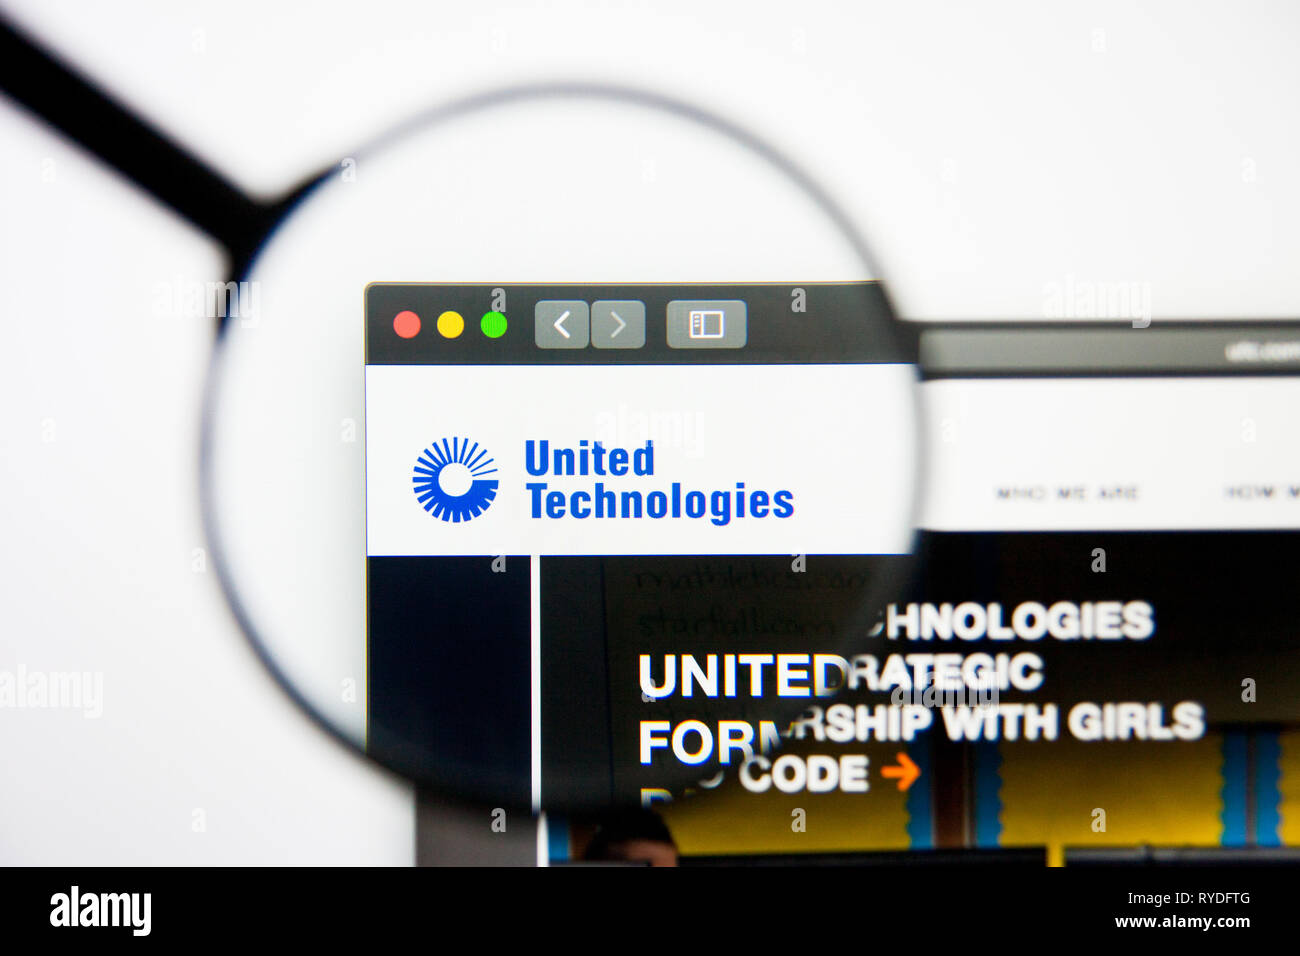 Los Angeles, California, USA - 5 March 2019: United Technologies website homepage. United Technologies logo visible on display screen, Illustrative Stock Photo